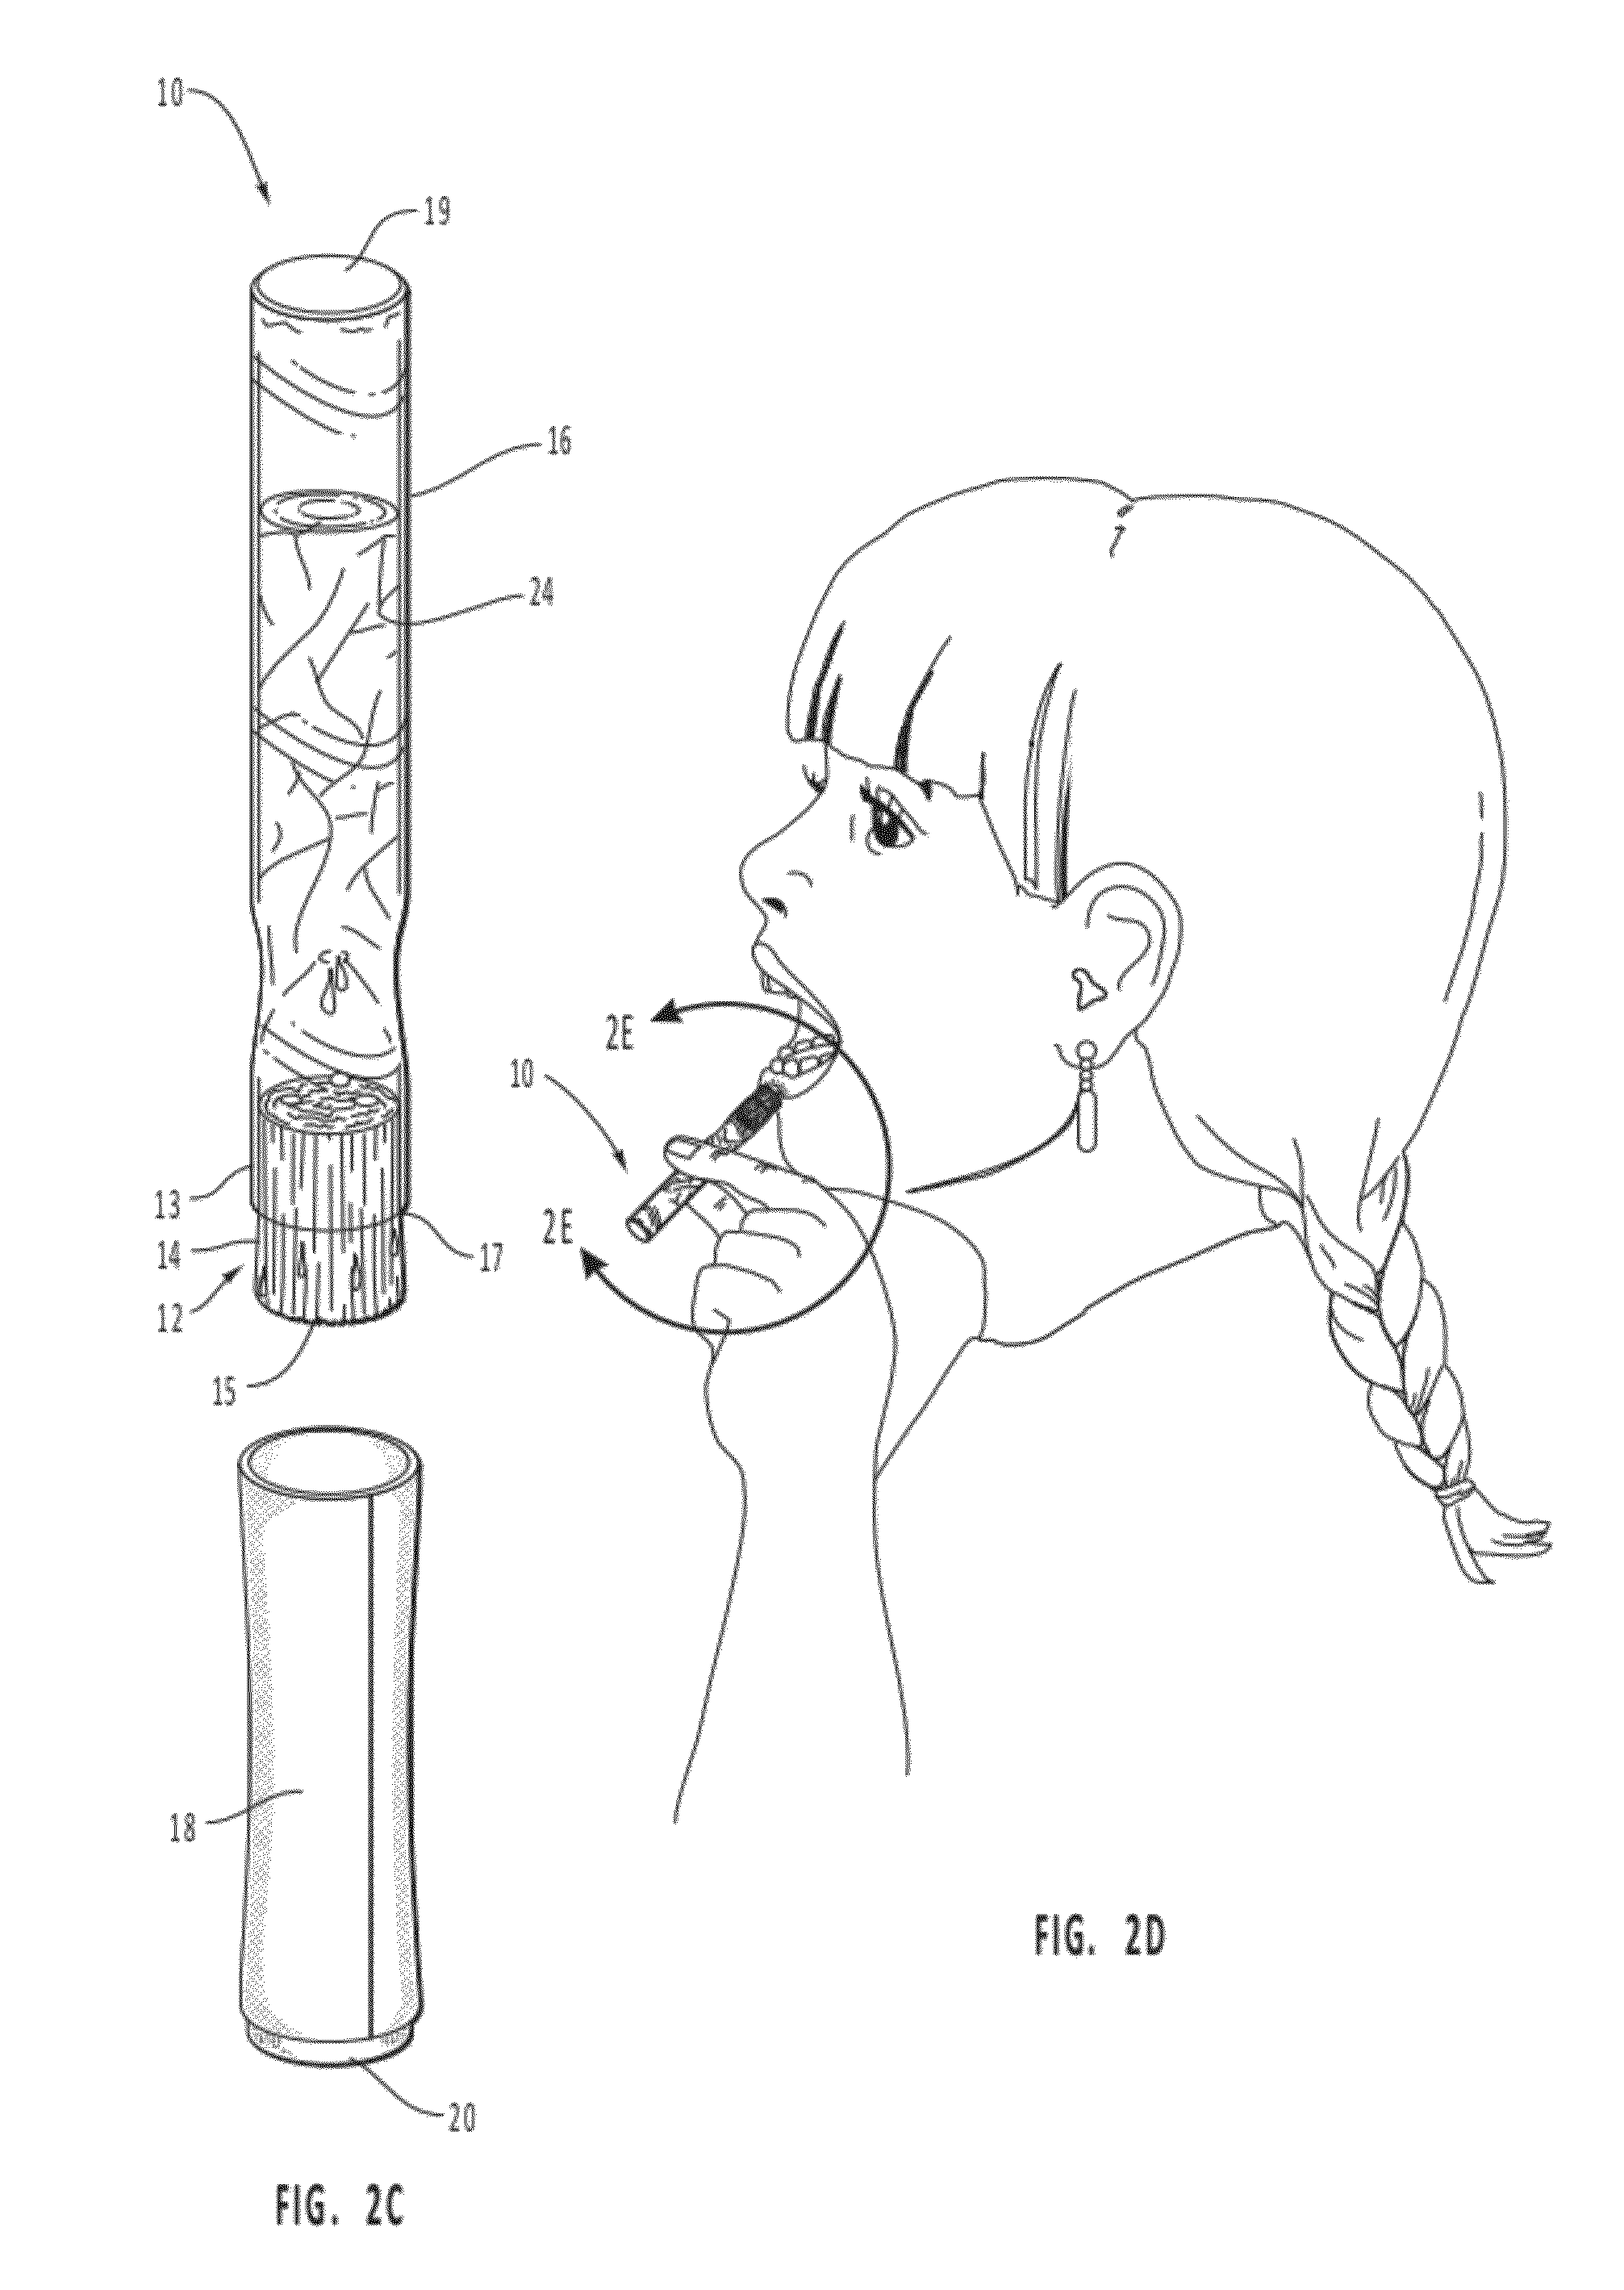 Highly penetrating compositions and methods for treating pathogen-induced disordered tissues